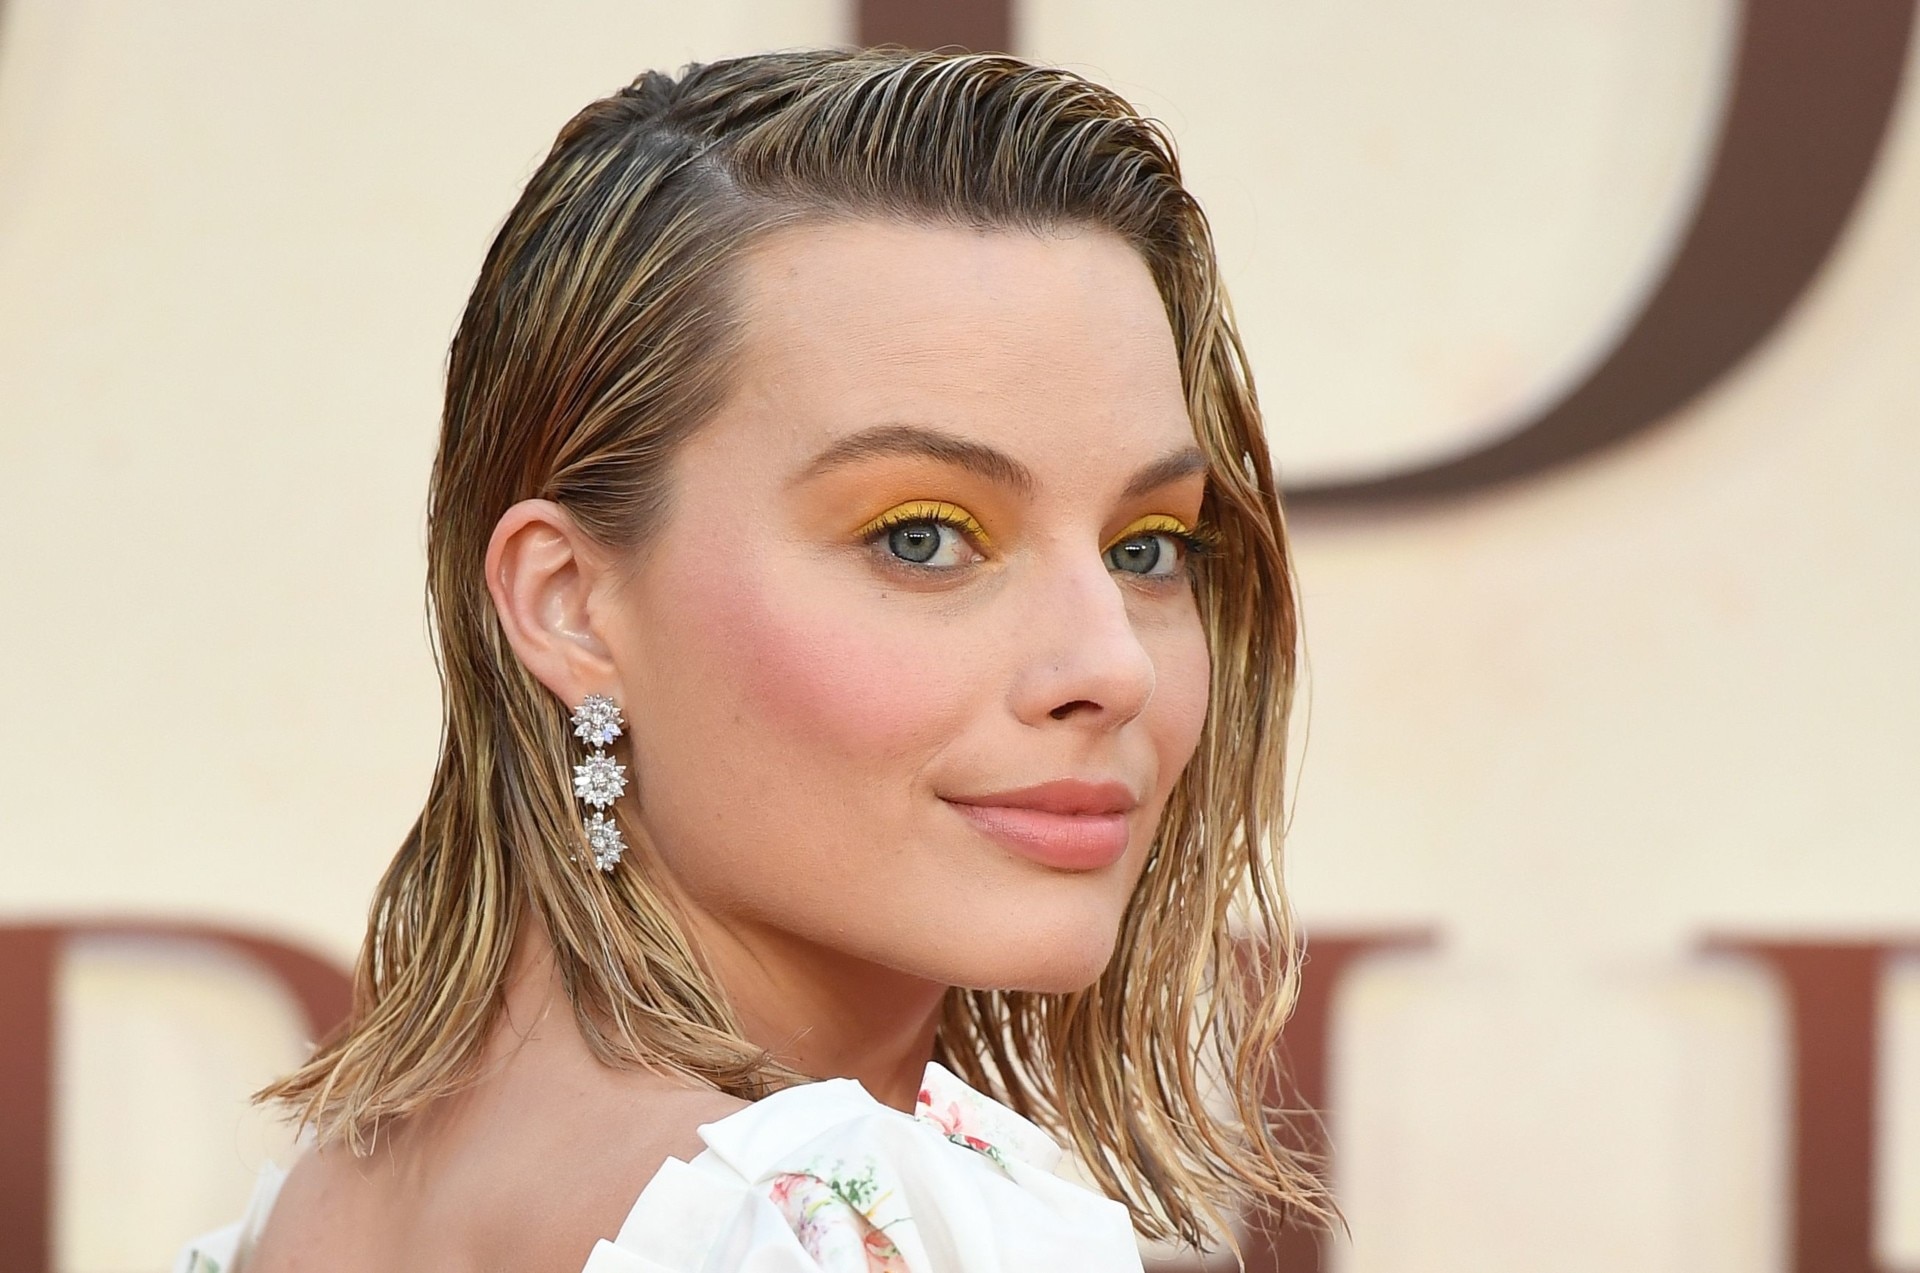 Margot Robbie is far more subversive than 'the hottest blonde ever